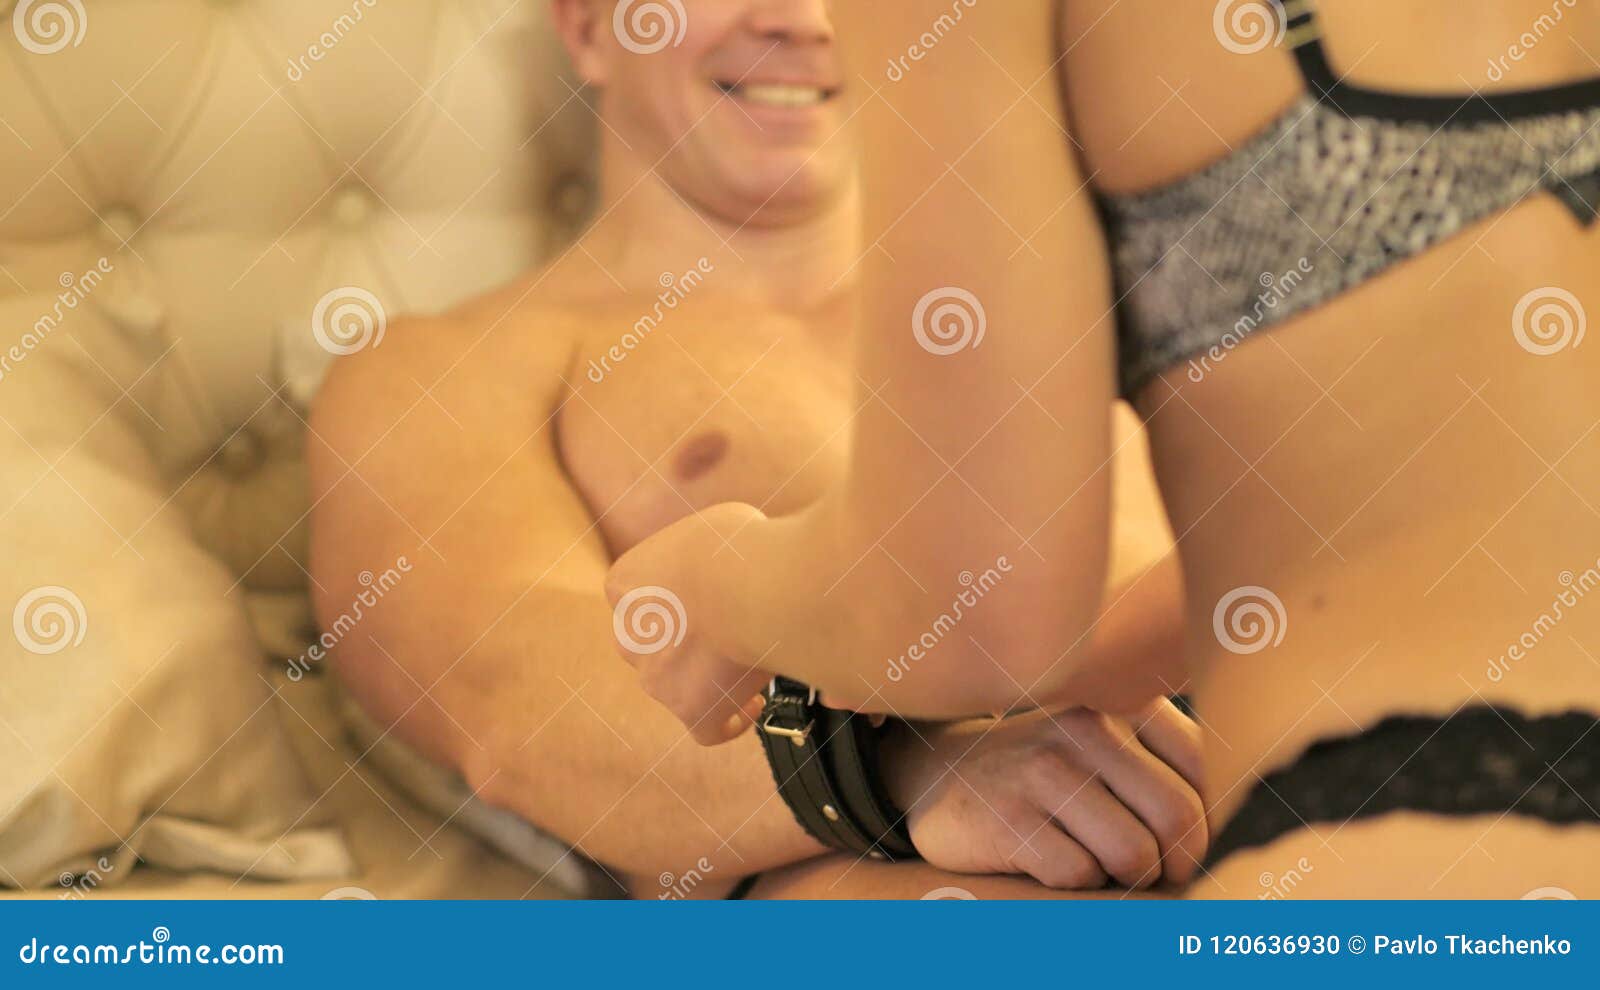 Playful Wife Flirting with Husband Stock Footage pic